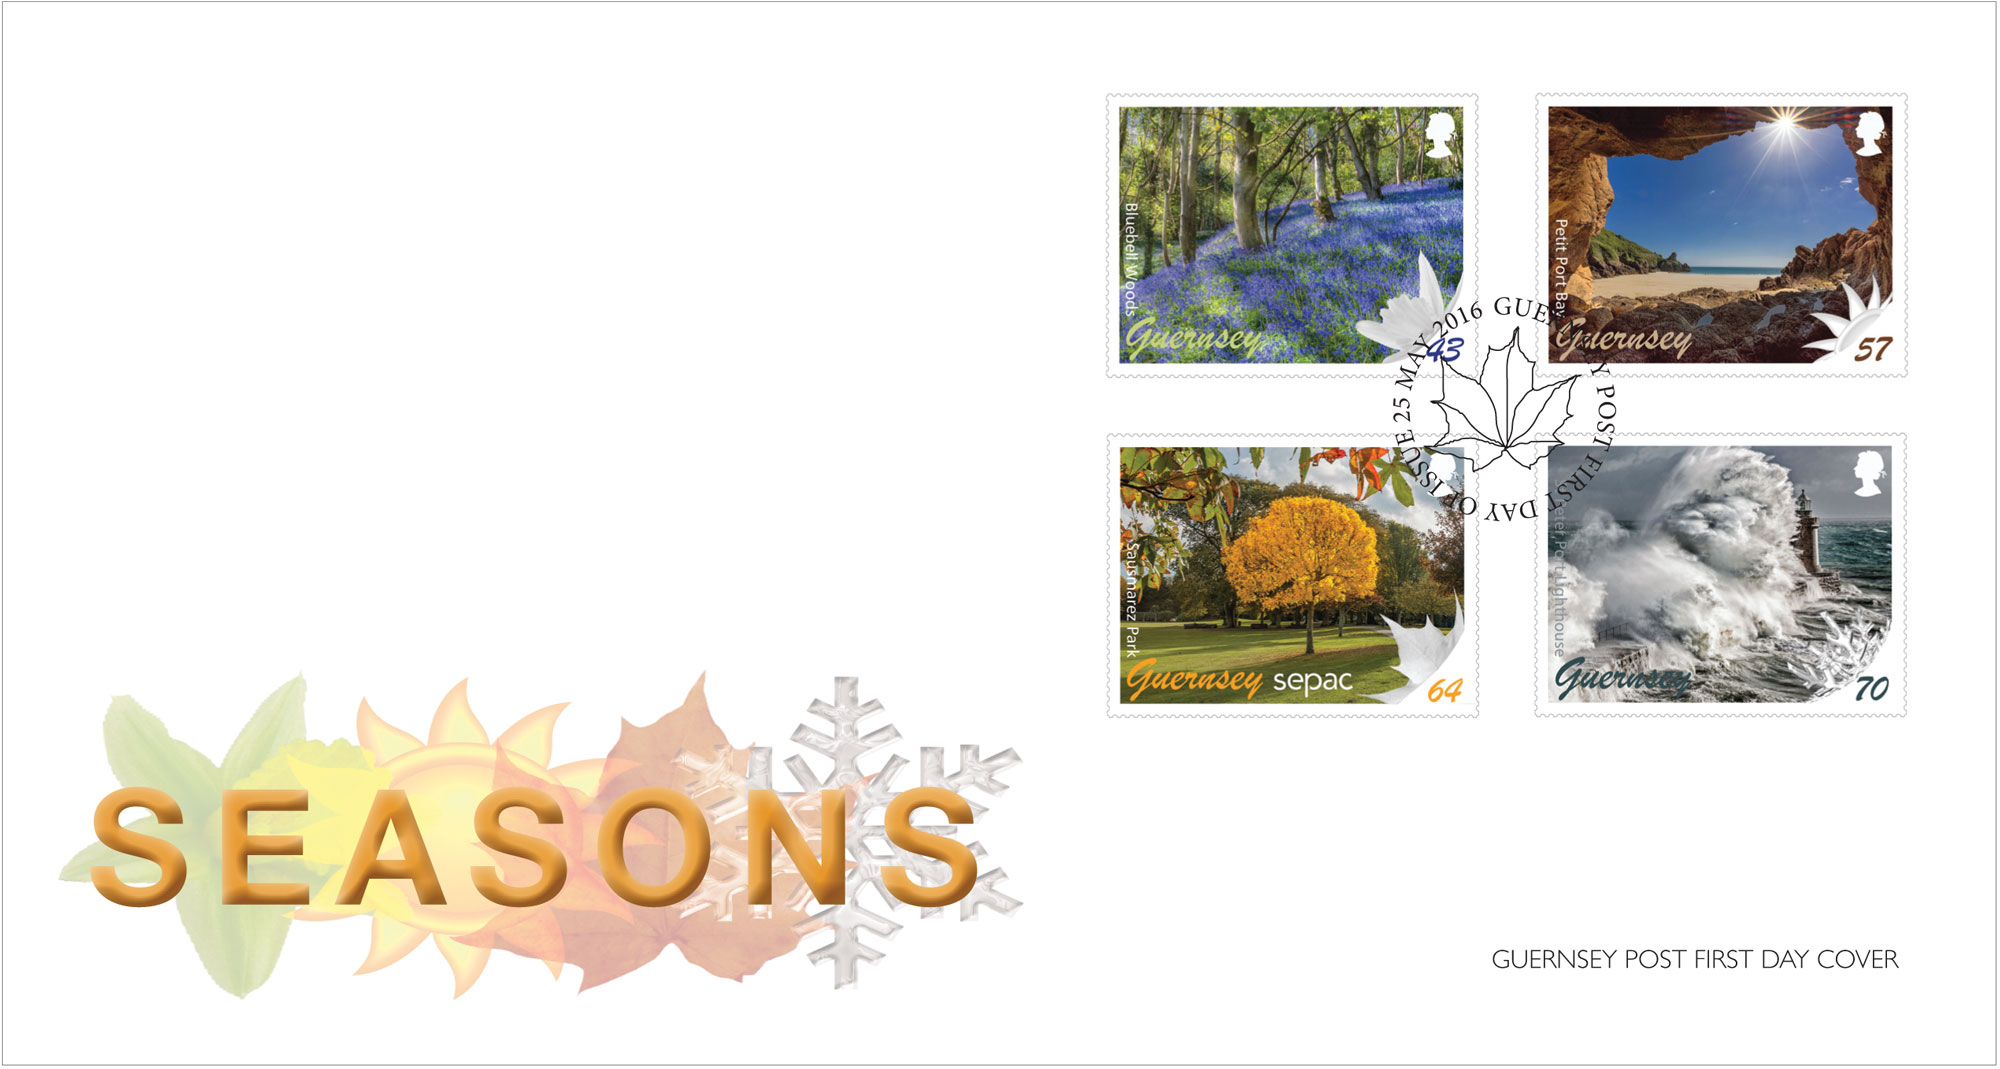 First Day Cover